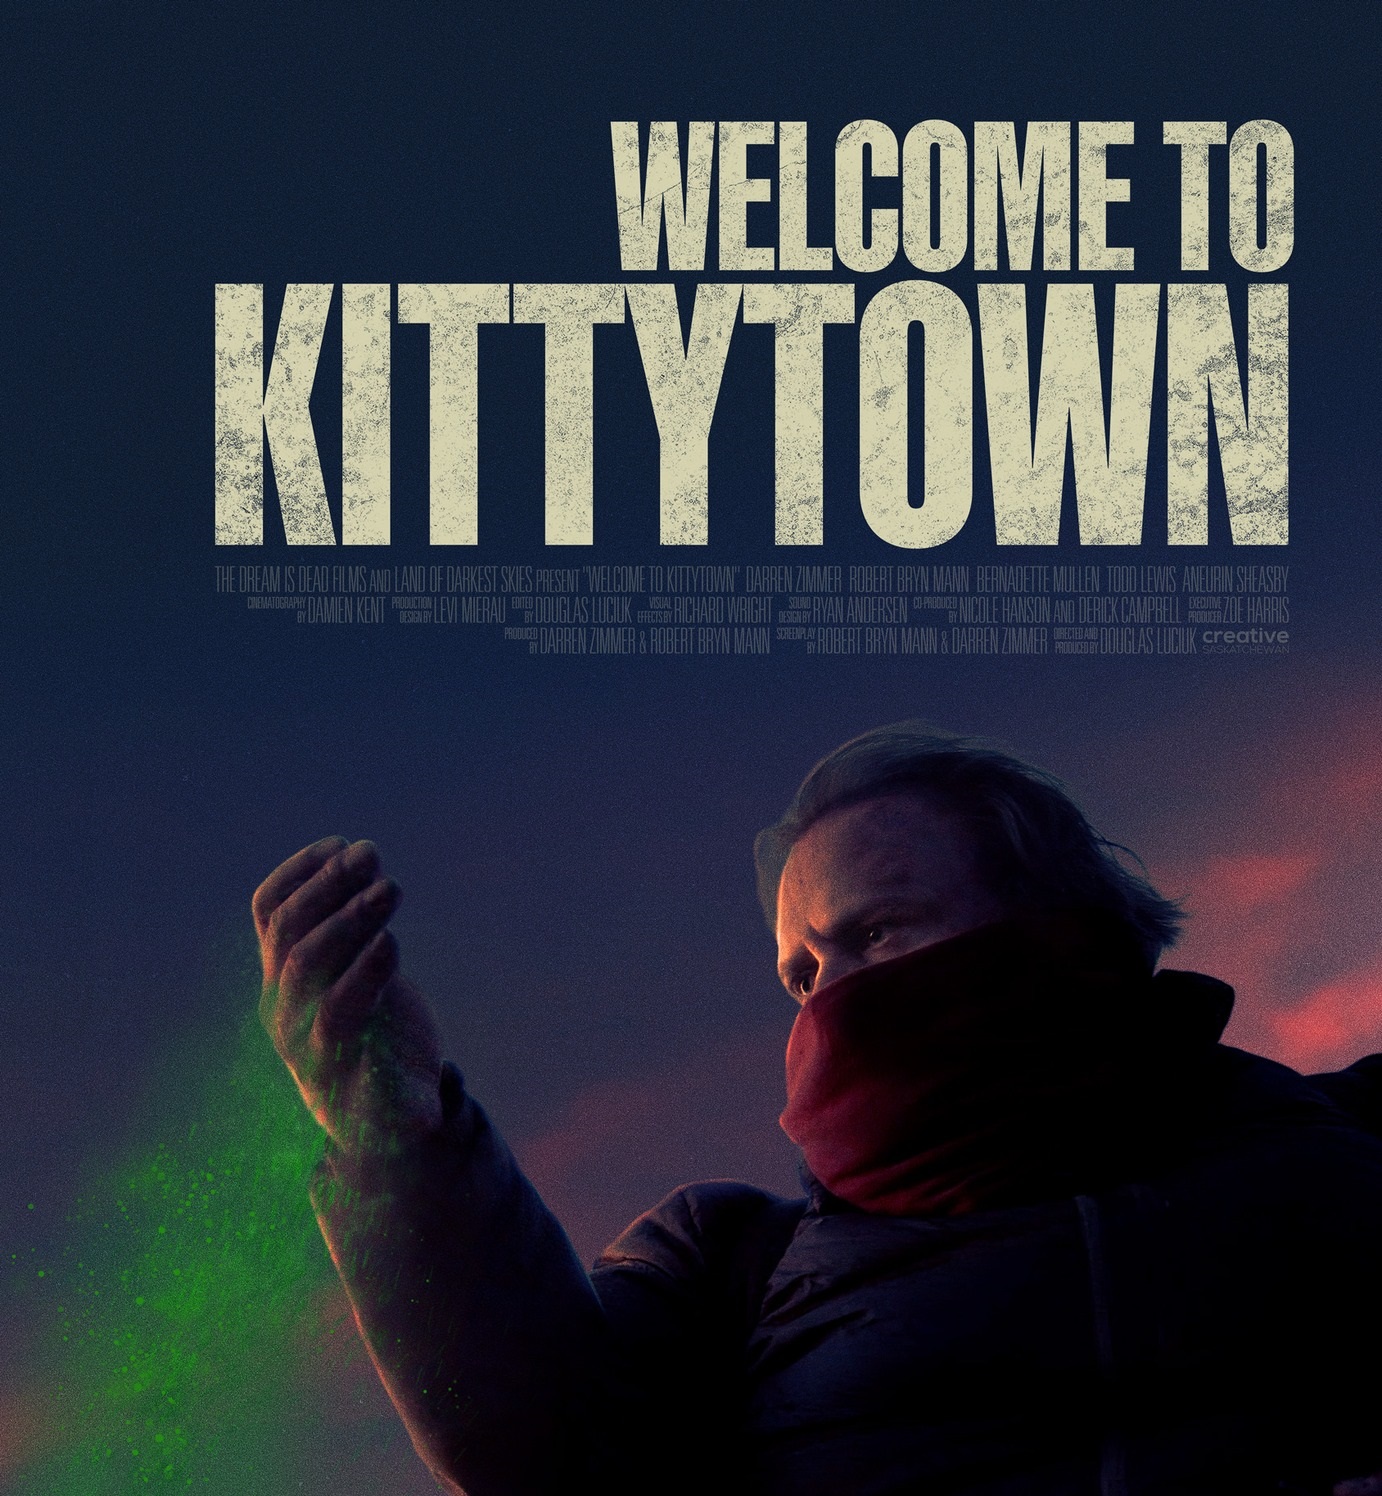 Welcome to Kittytown